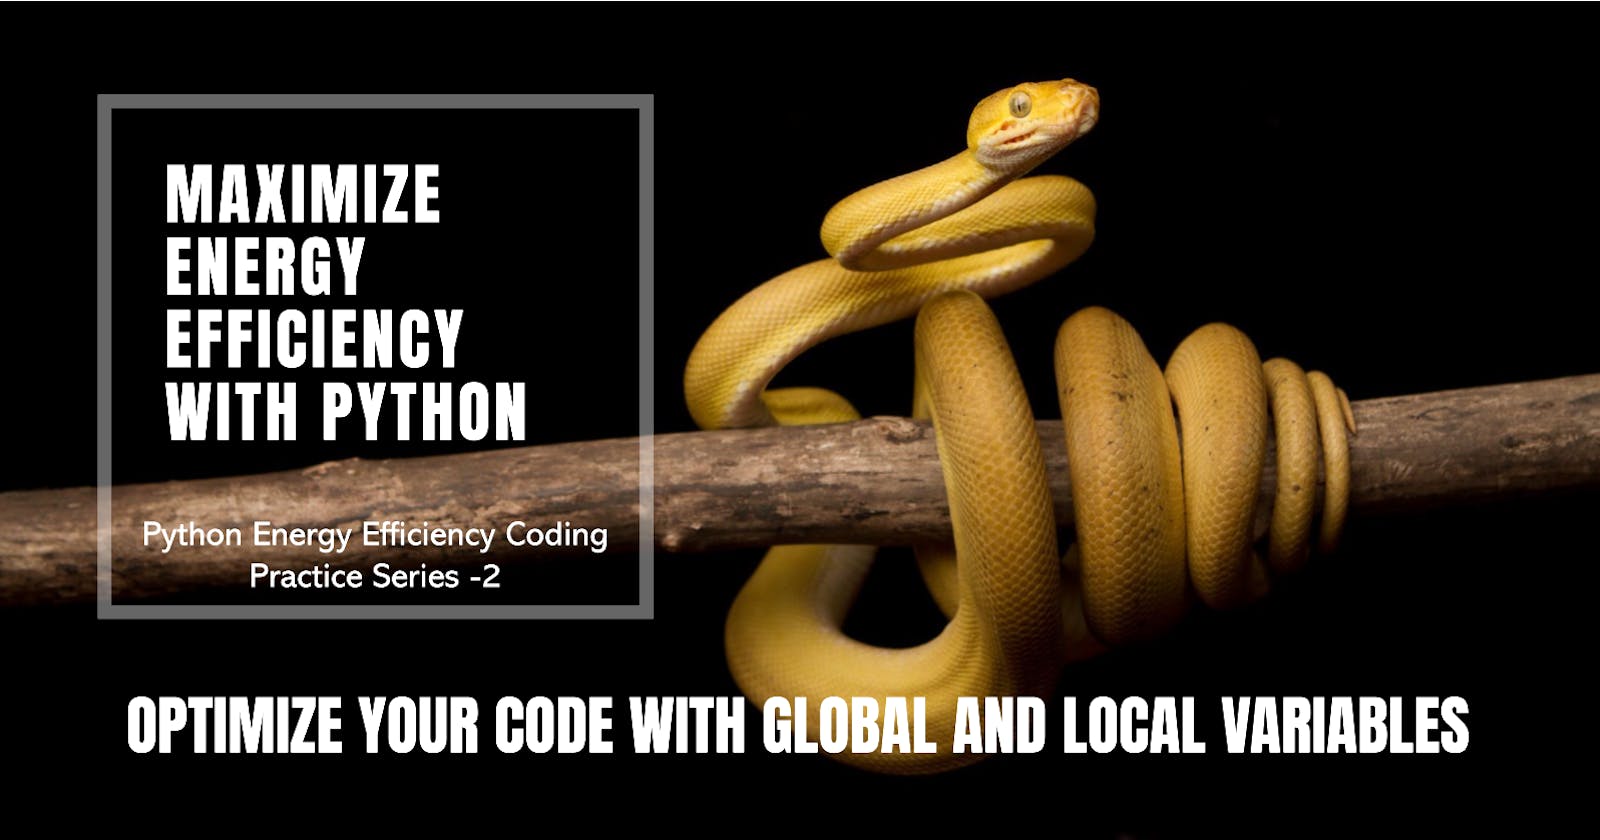 Finding the Balance: Global Functions, the Global Keyword, and Energy-Efficiency in Python